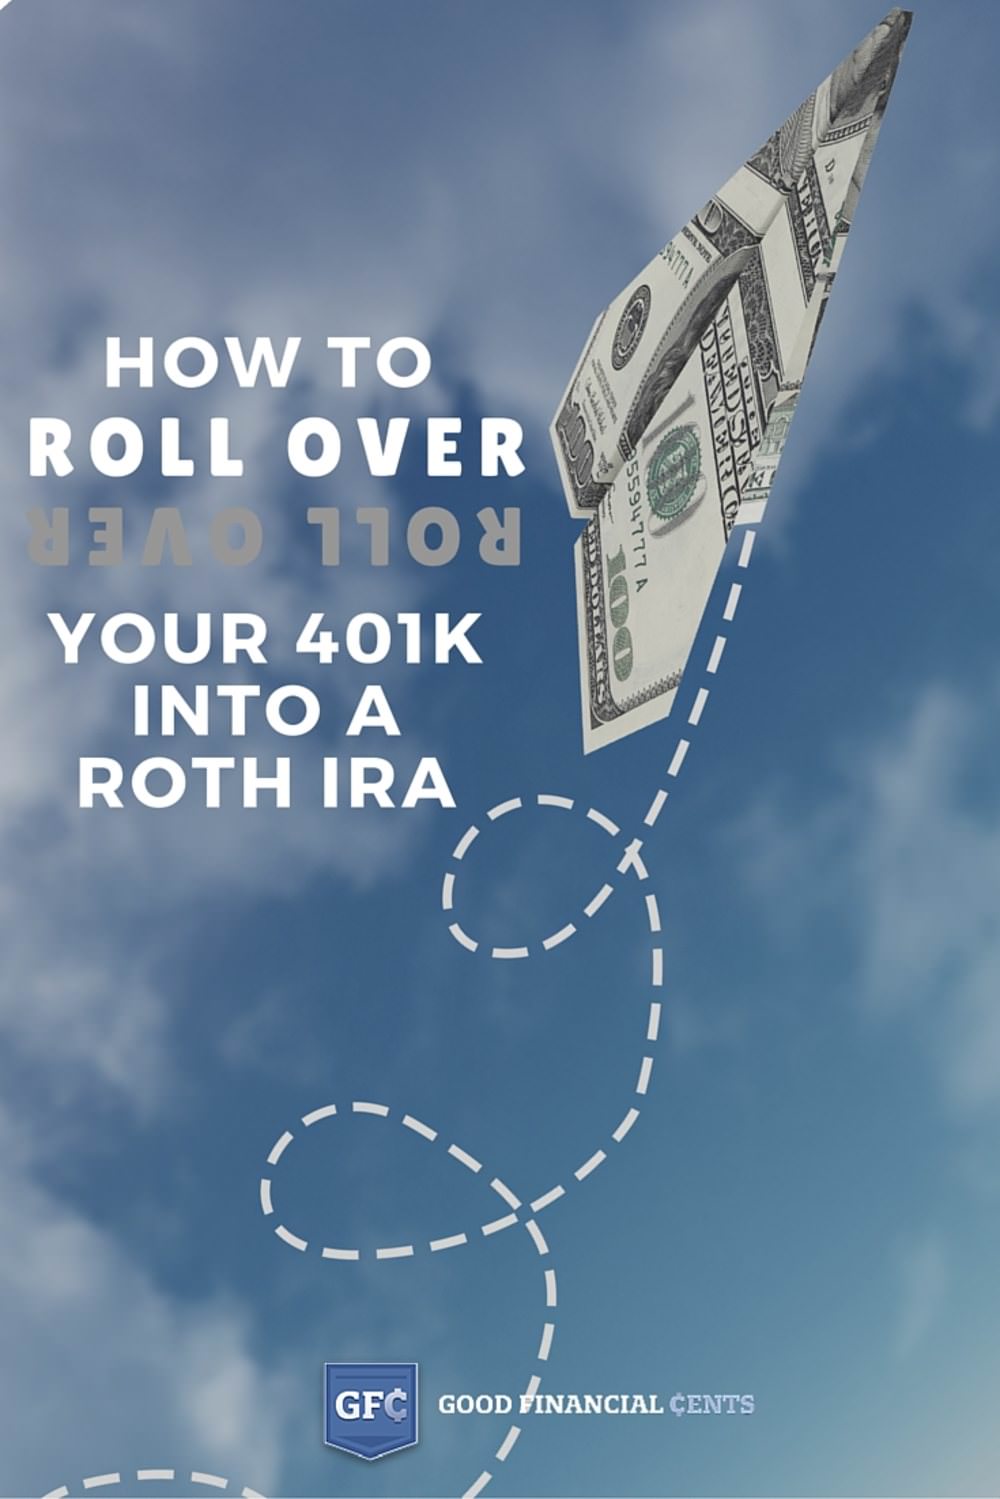 Can You Rollover Your 401k to a Roth IRA?